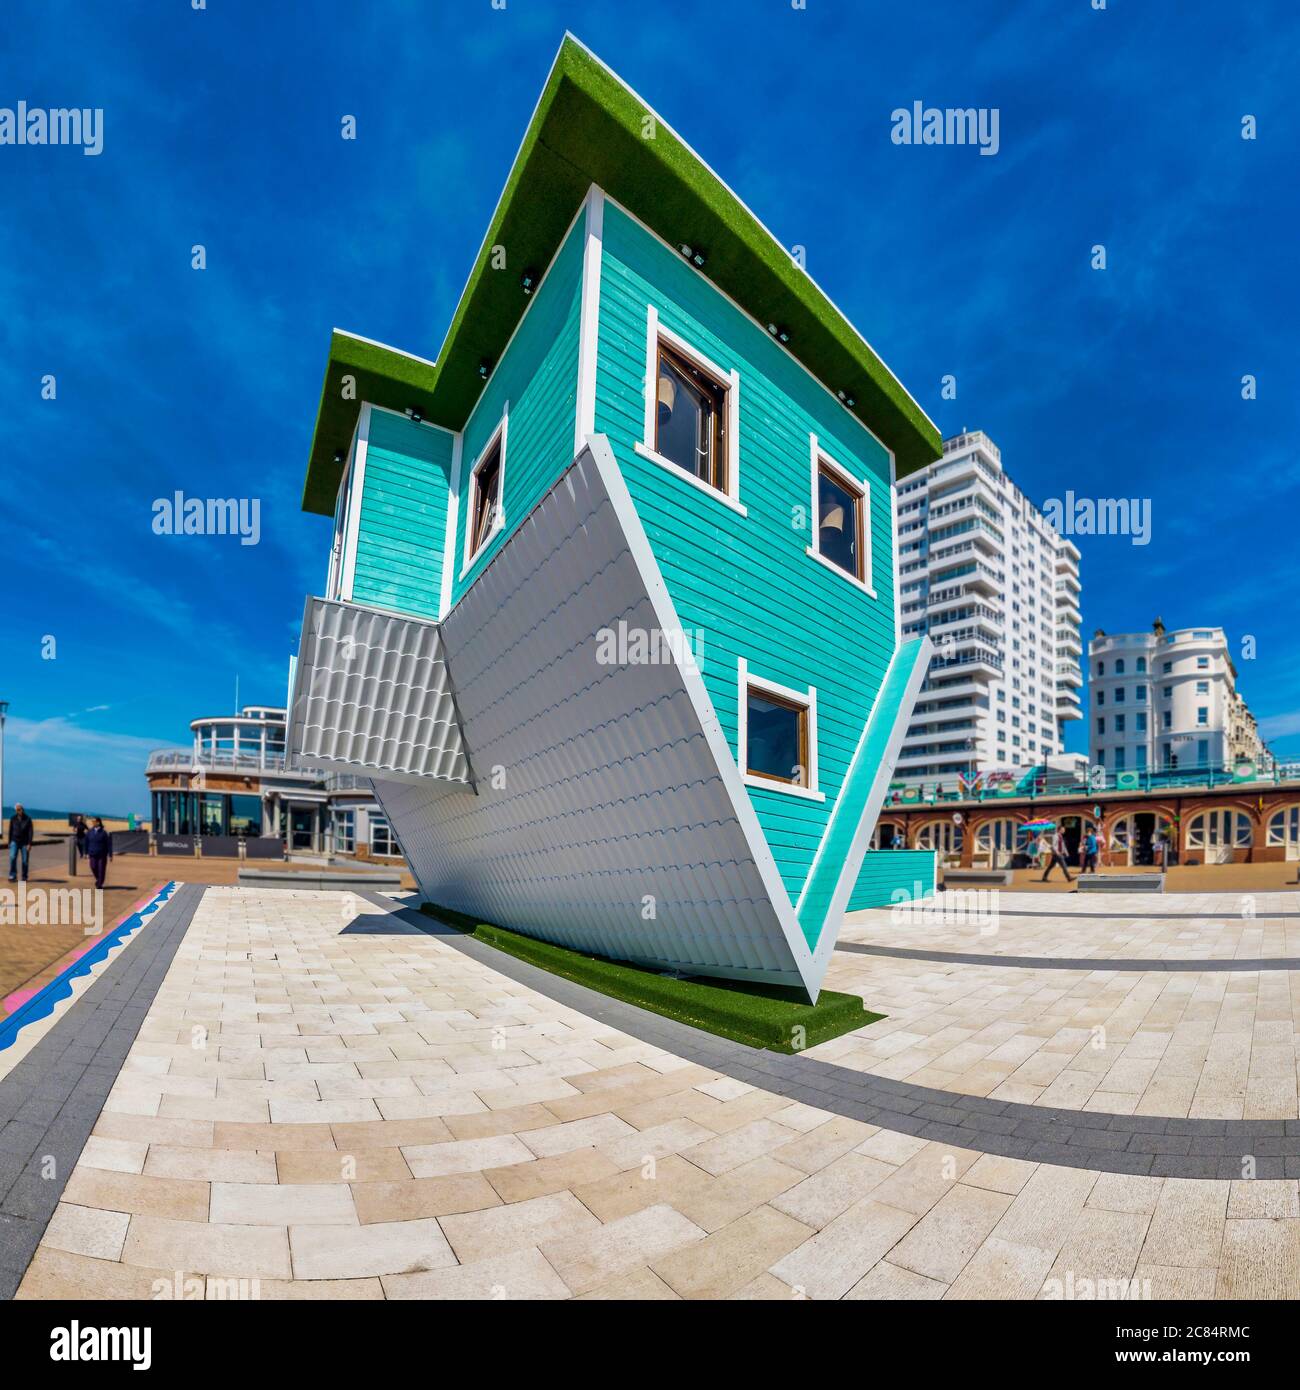 Upside Down House, Brighton Seafront, Brighton, East Sussex Stockfoto